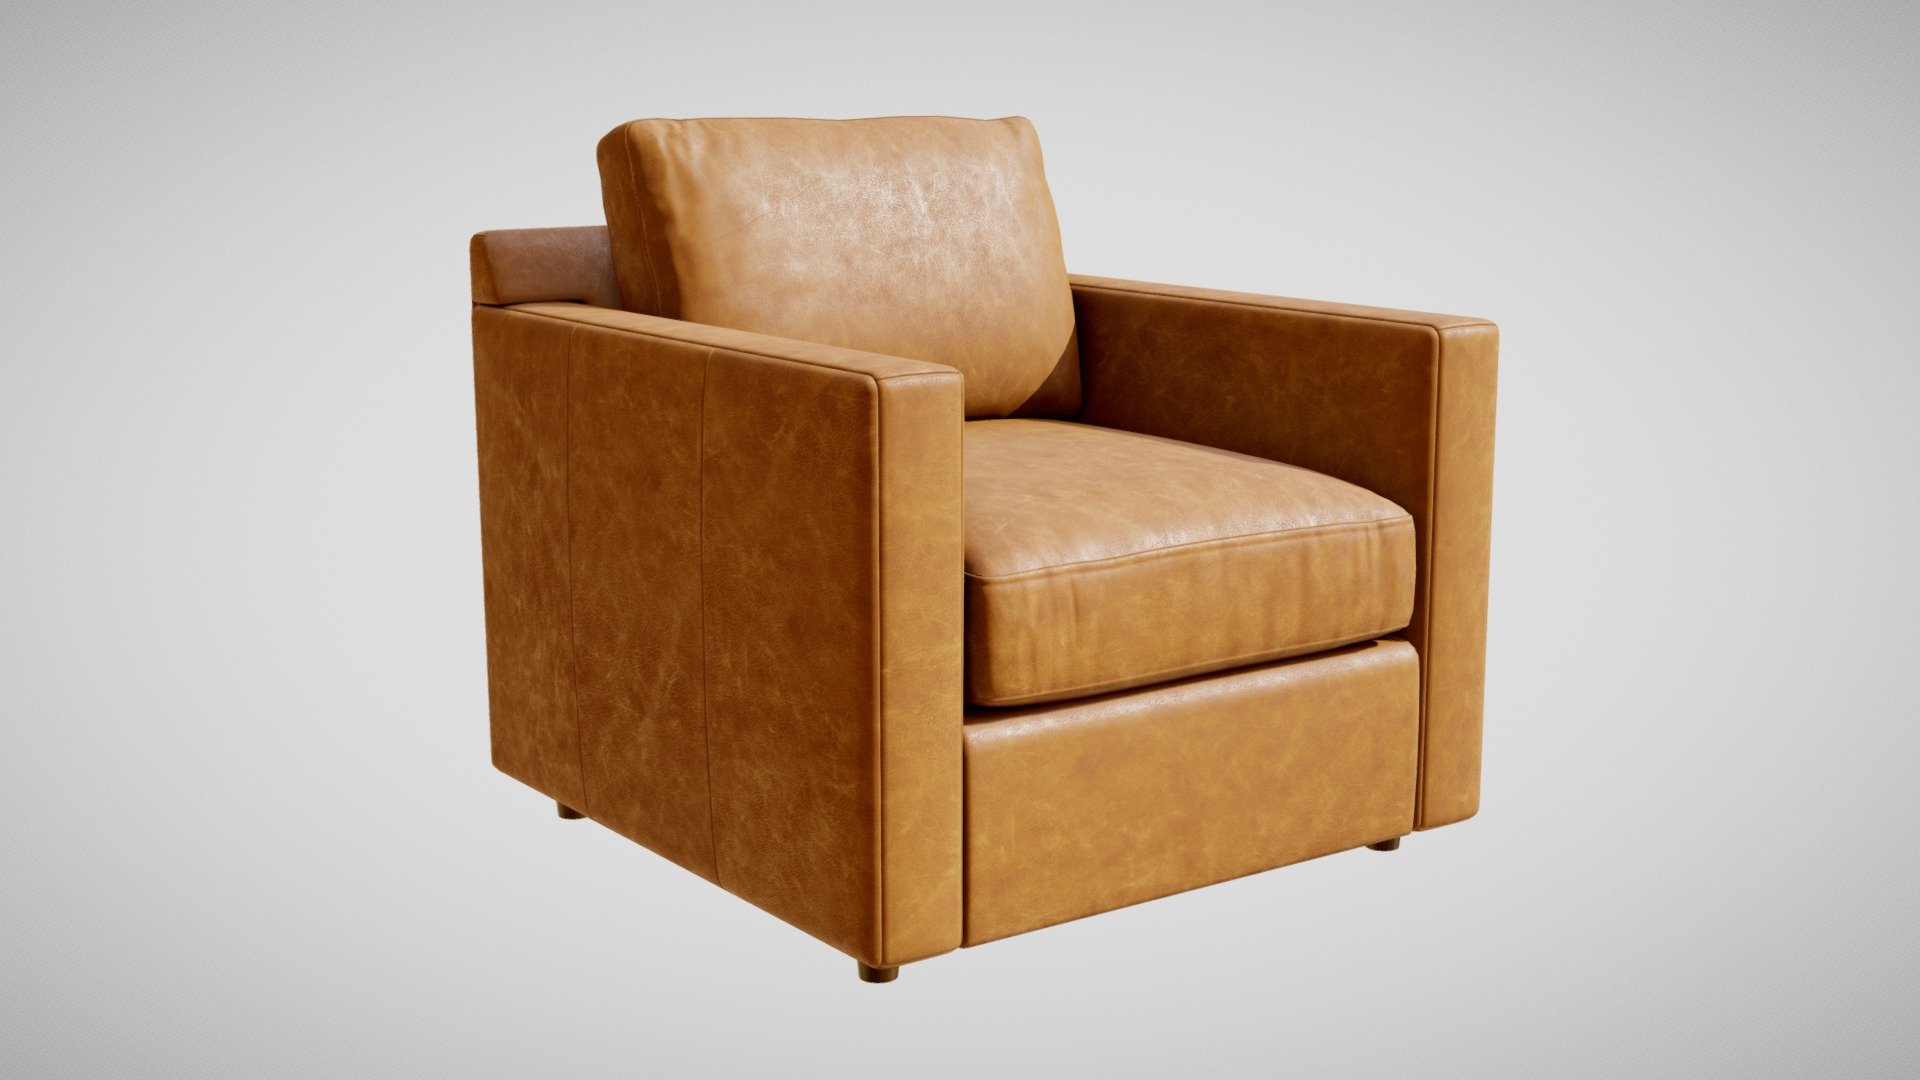 High-quality 3d model of a Crate and Barrel Barrett II Leather Track Arm Chair

Original: https://www.crateandbarrel.com/barrett-ii-leather-track-arm-chair/s231396?oc=2,2820

Formats:
3dsMax 2011 V-ray materials
FBX
OBJ

8771 polygons
9060 vertices - Crate&Barrel Barrett II Armchair - Buy Royalty Free 3D model by 3detto 3d model